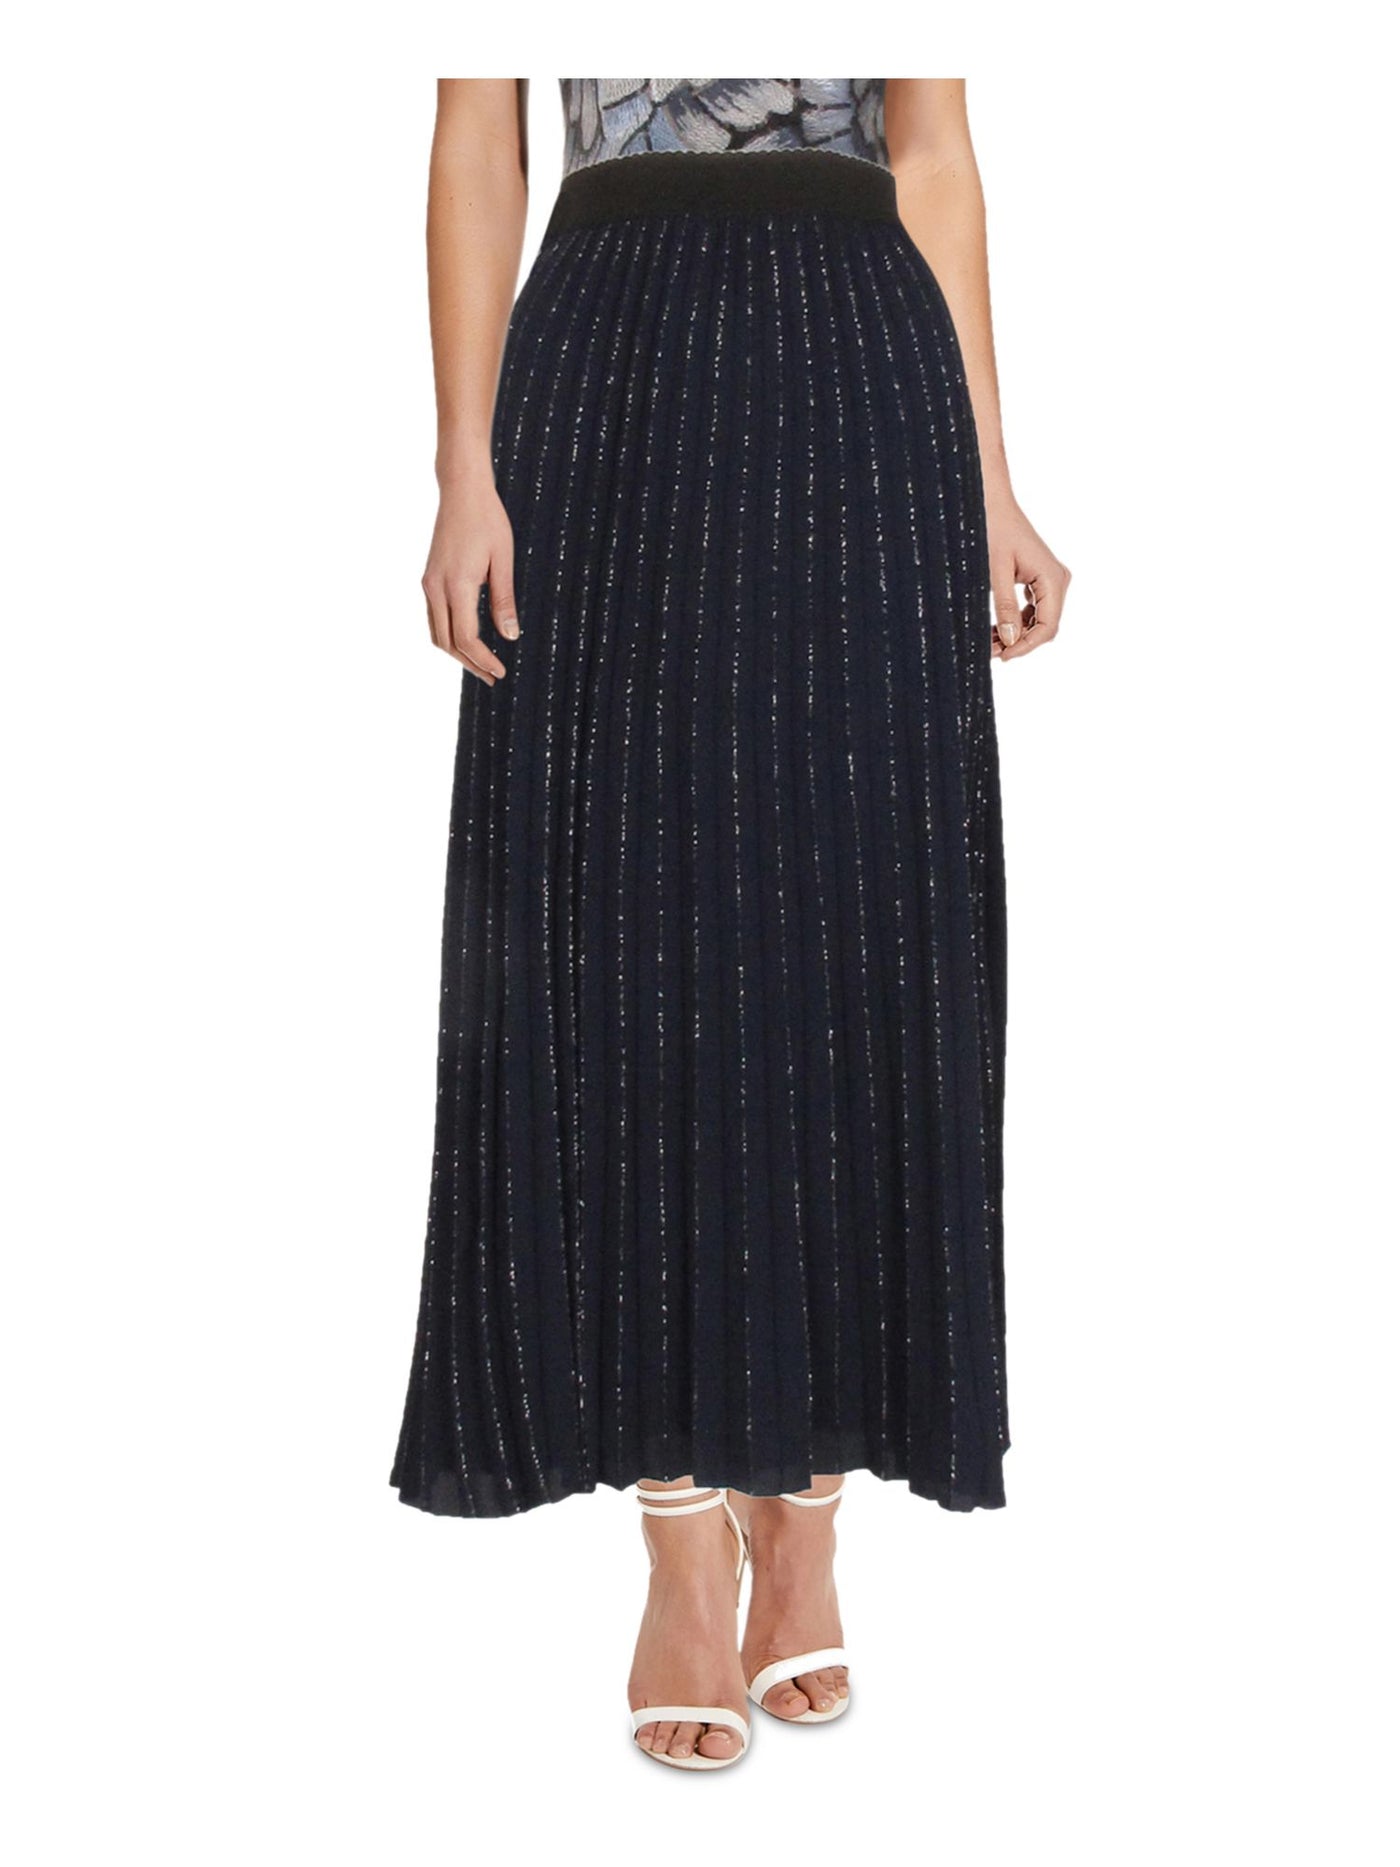 ADRIANNA PAPELL Womens Navy Metallic Pull On Styling Tea-Length Cocktail Pleated Skirt 4